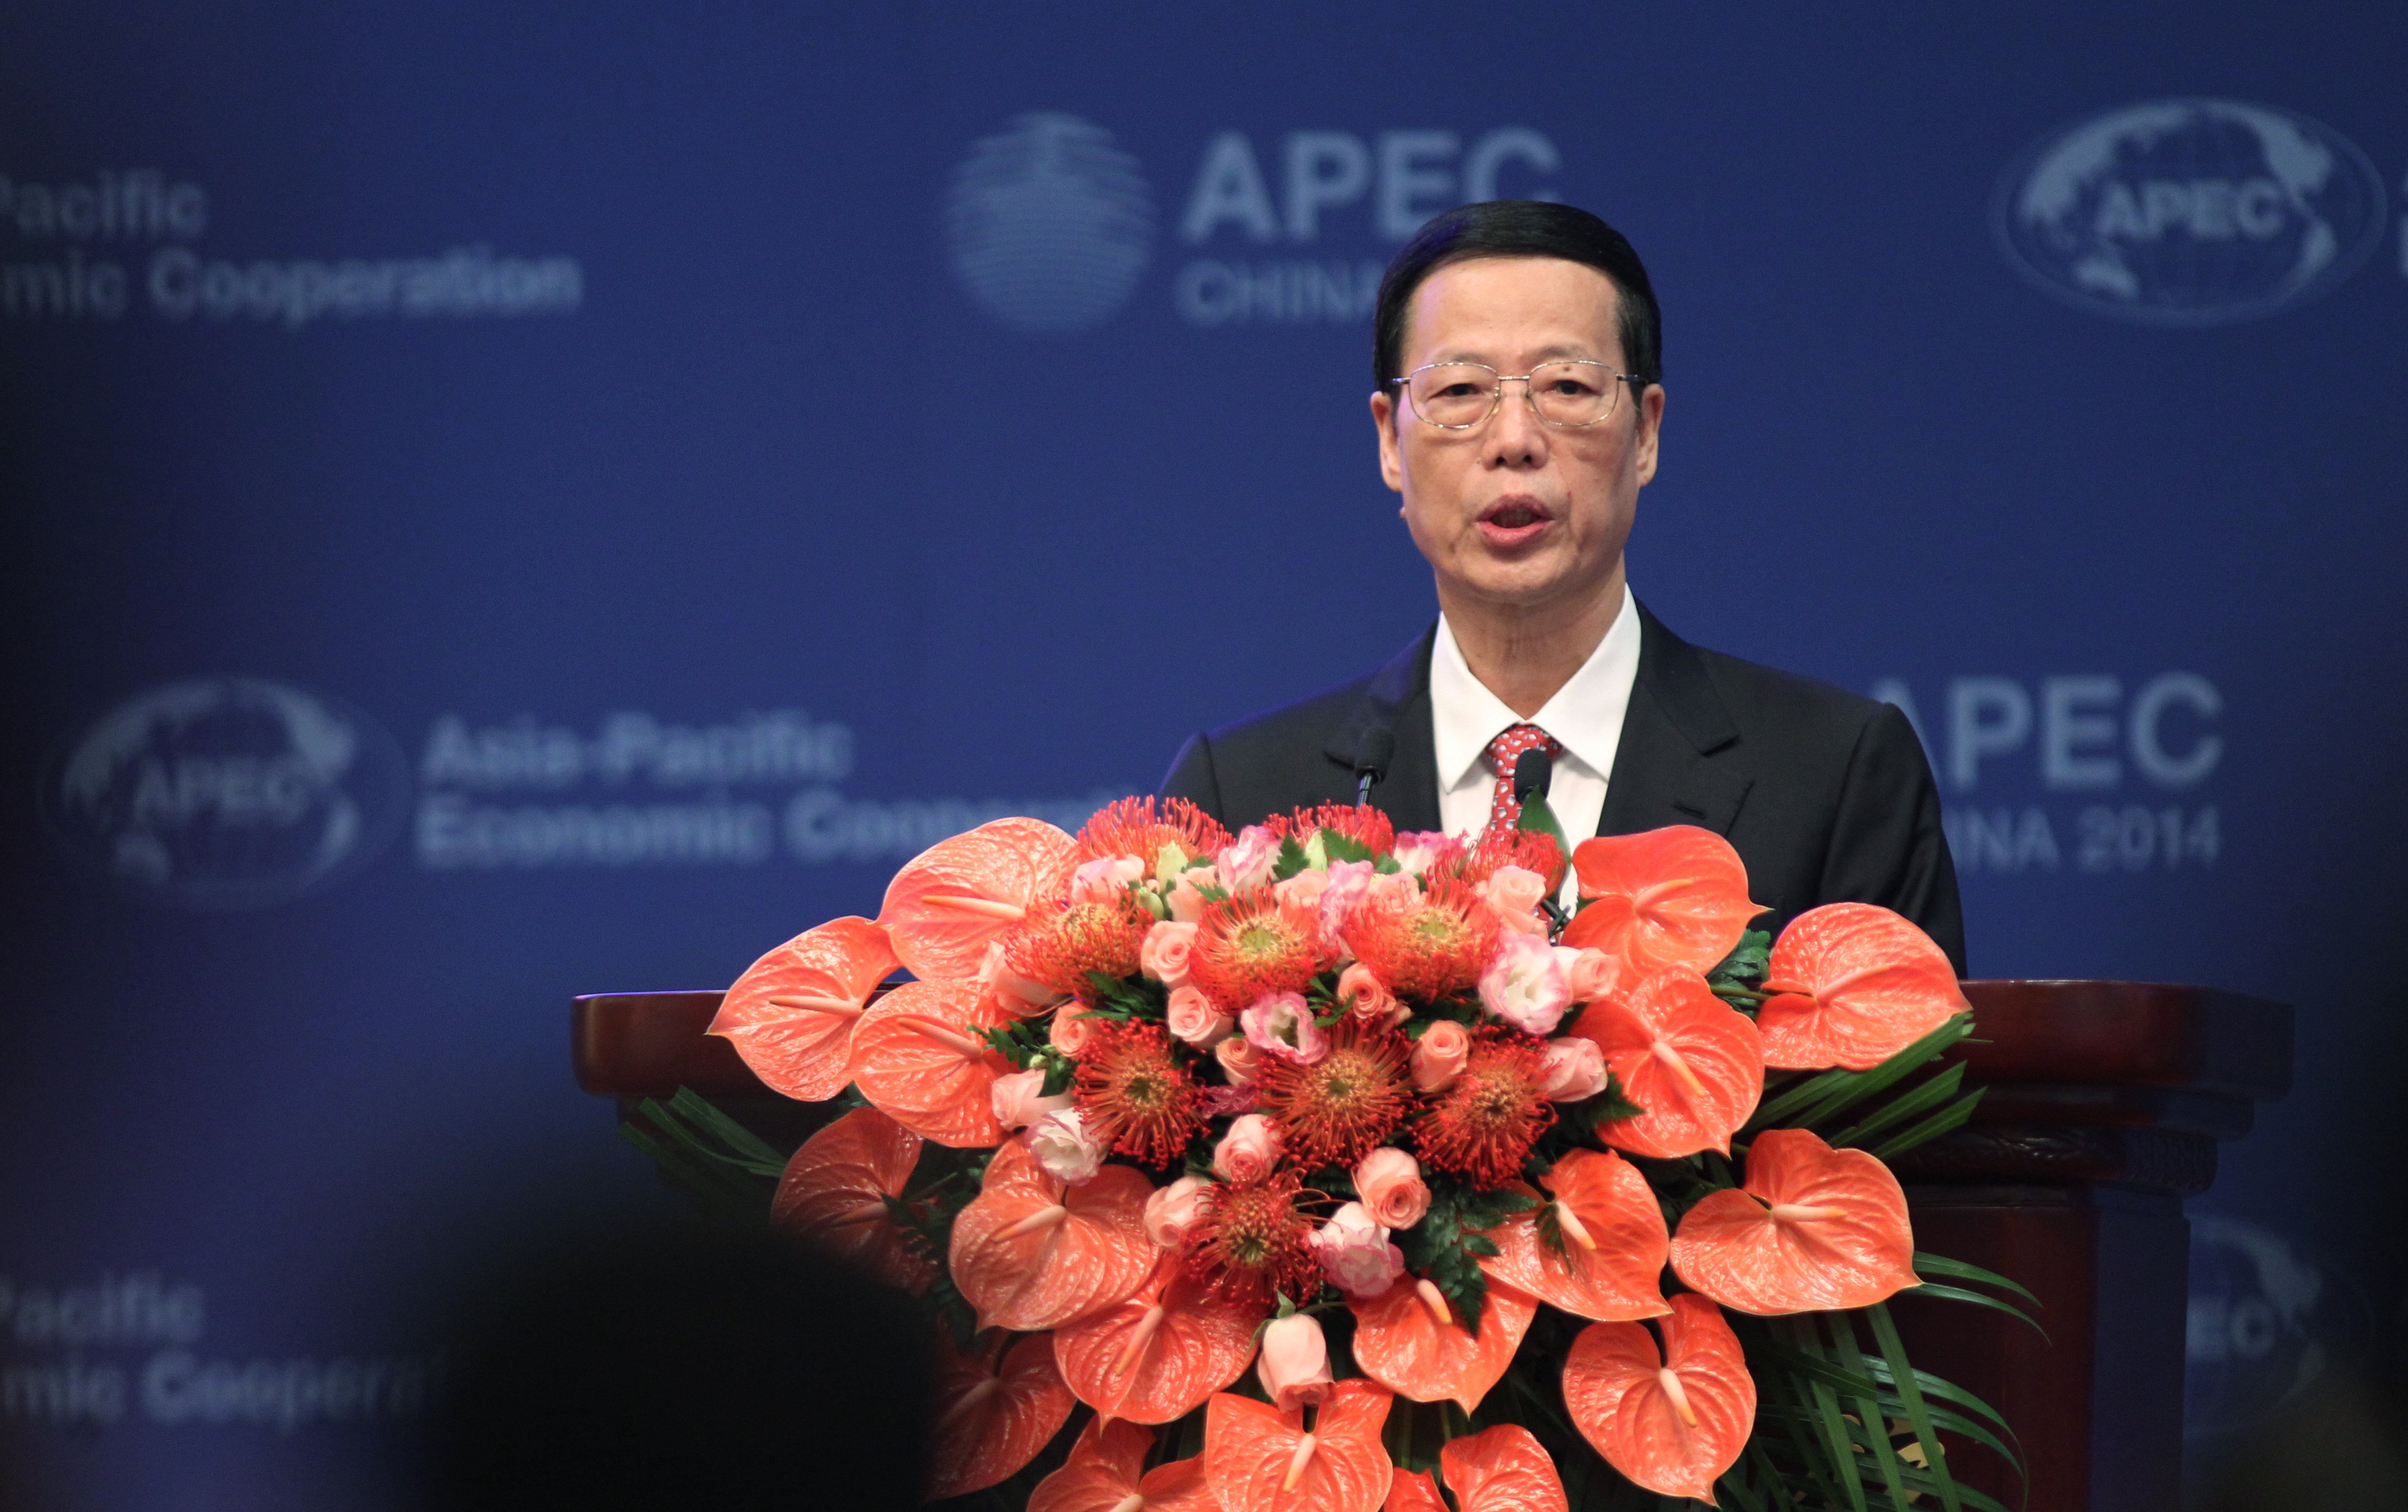 China's Vice-Premier Zhang Gaoli speaks at the Asia-Pacific Economic Cooperation forum finance ministers' meeting in Beijing in October last year. Photo: Simon Song